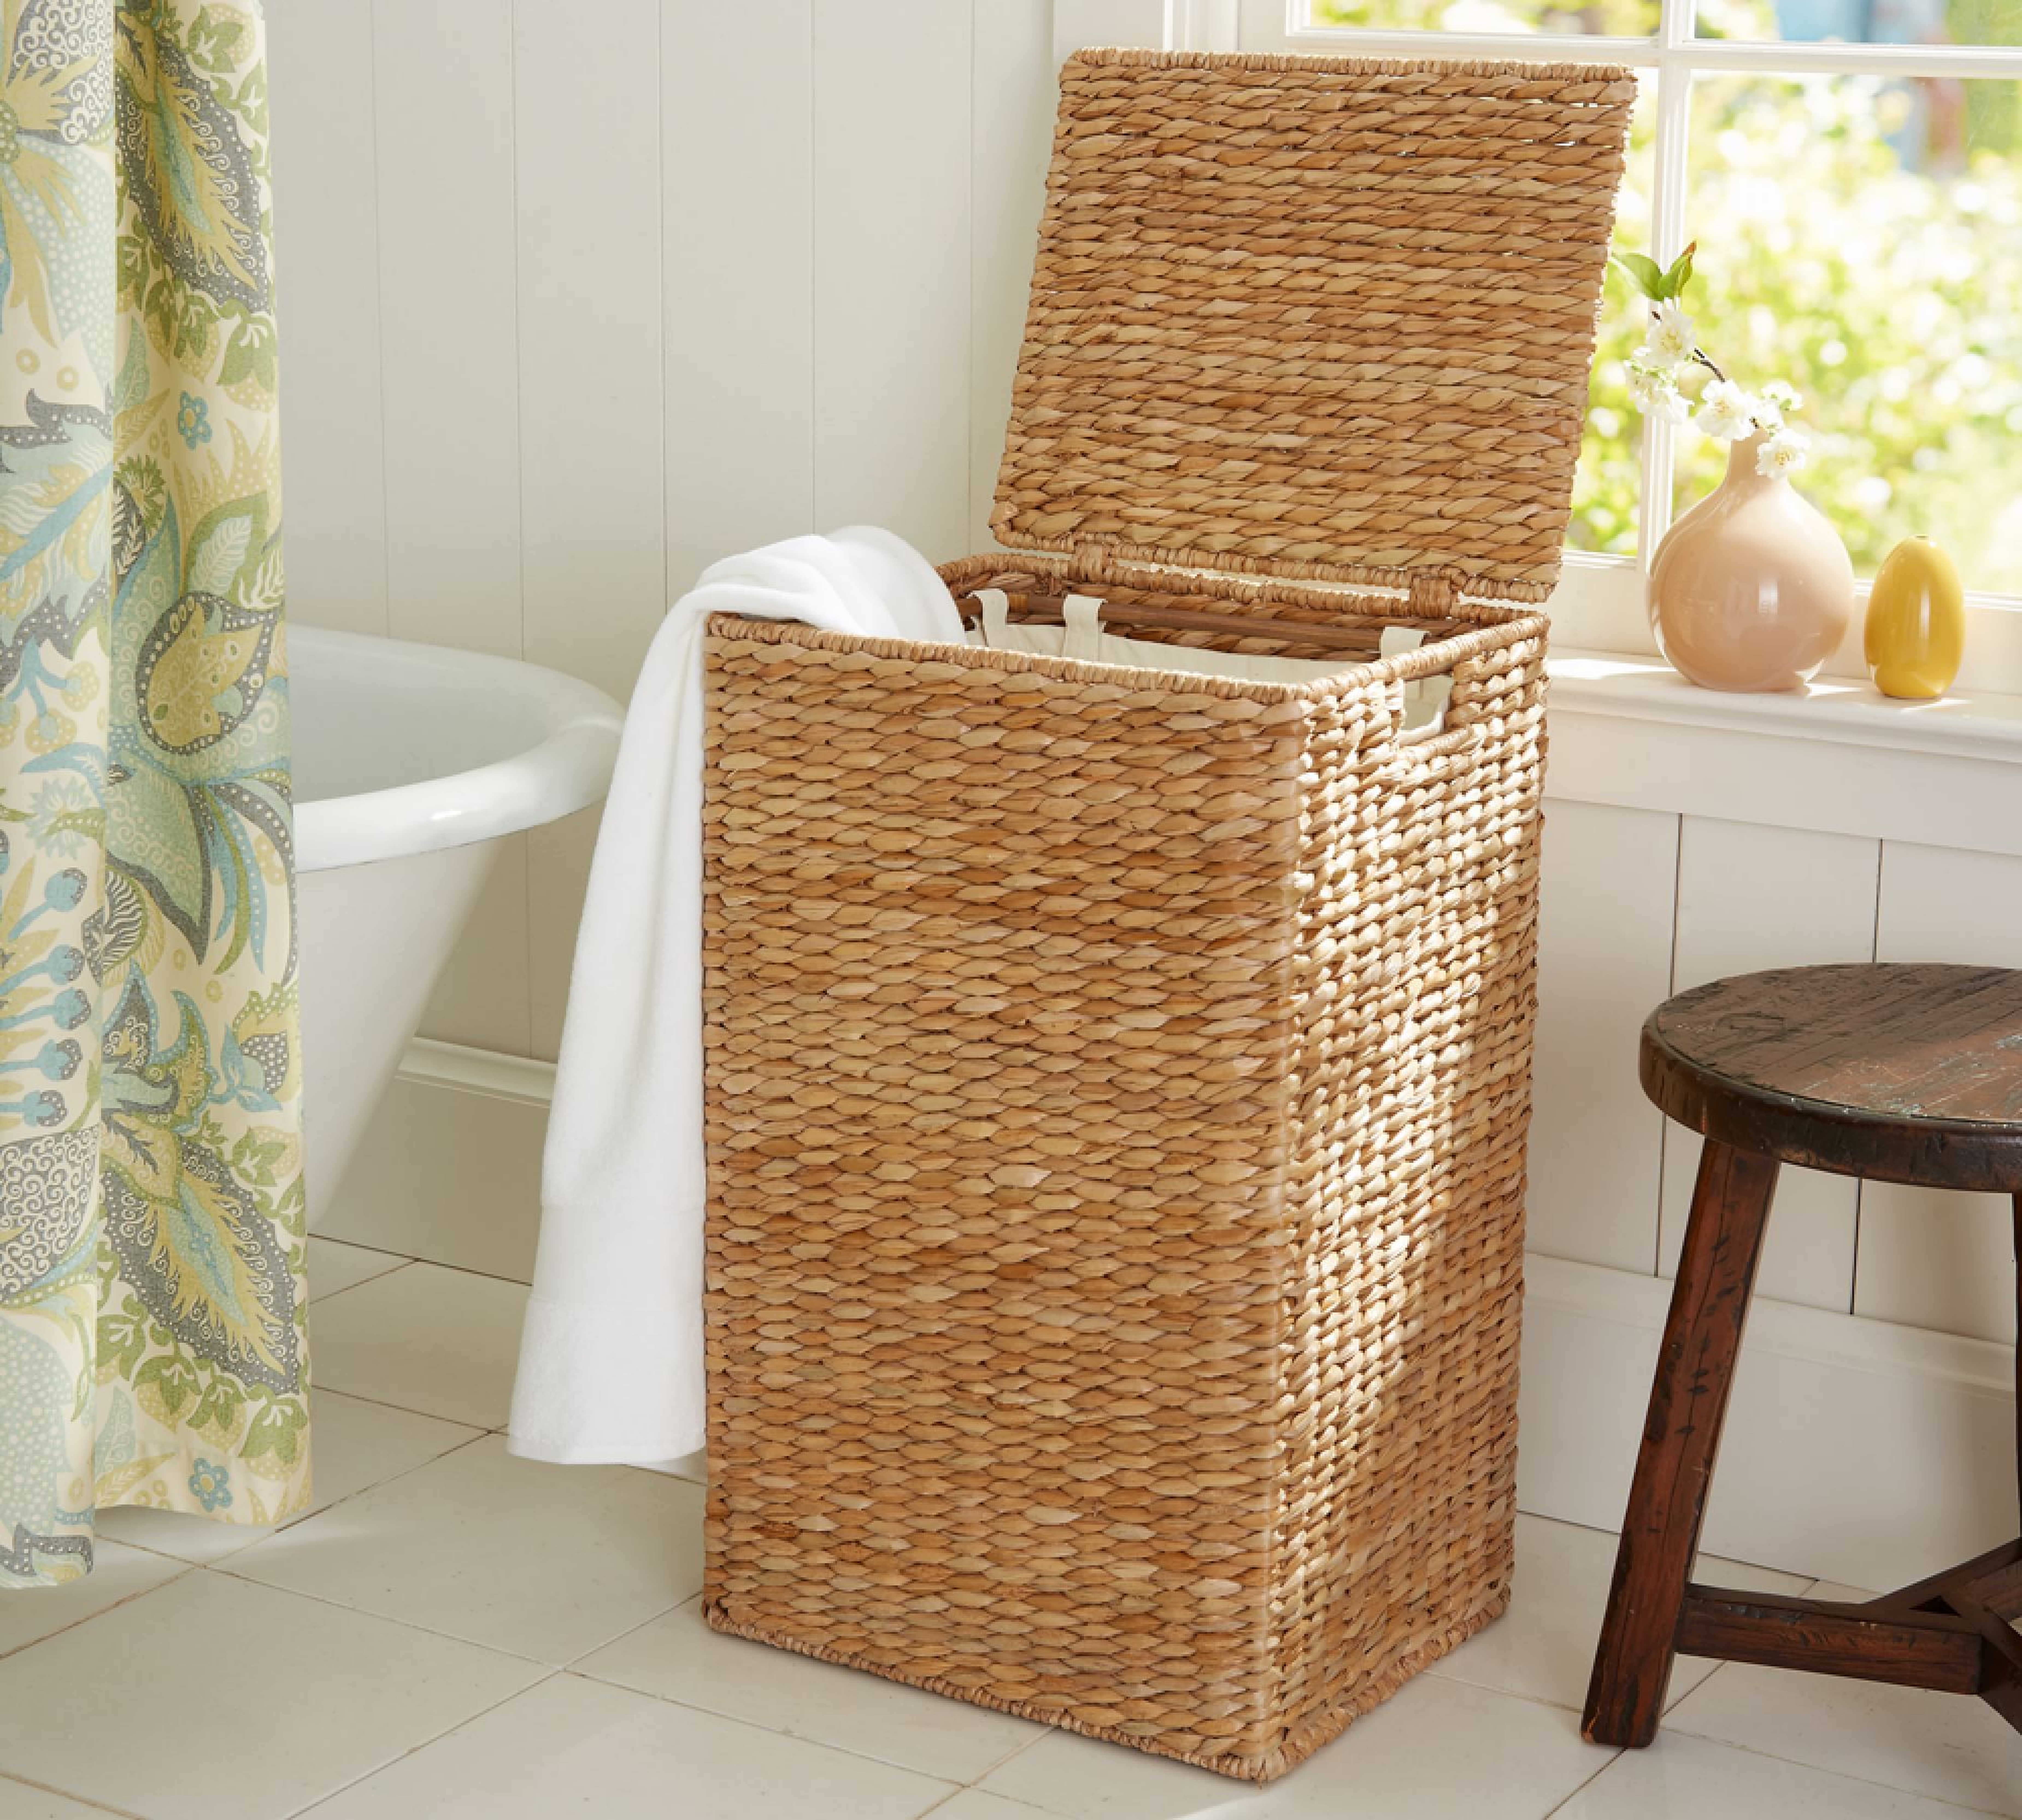 Seagrass Handcrafted Hamper - Pottery Barn